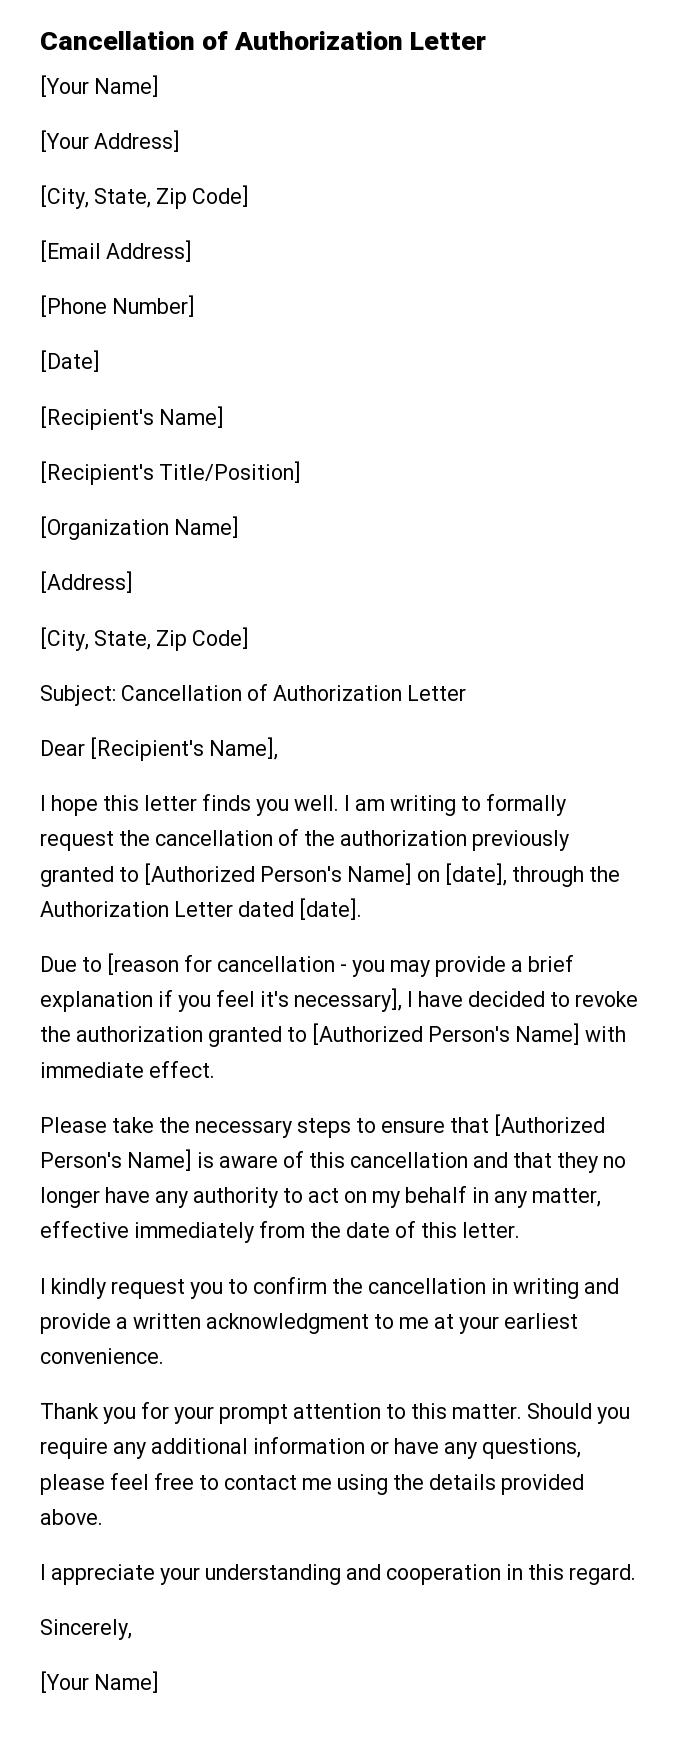 Cancellation of Authorization Letter